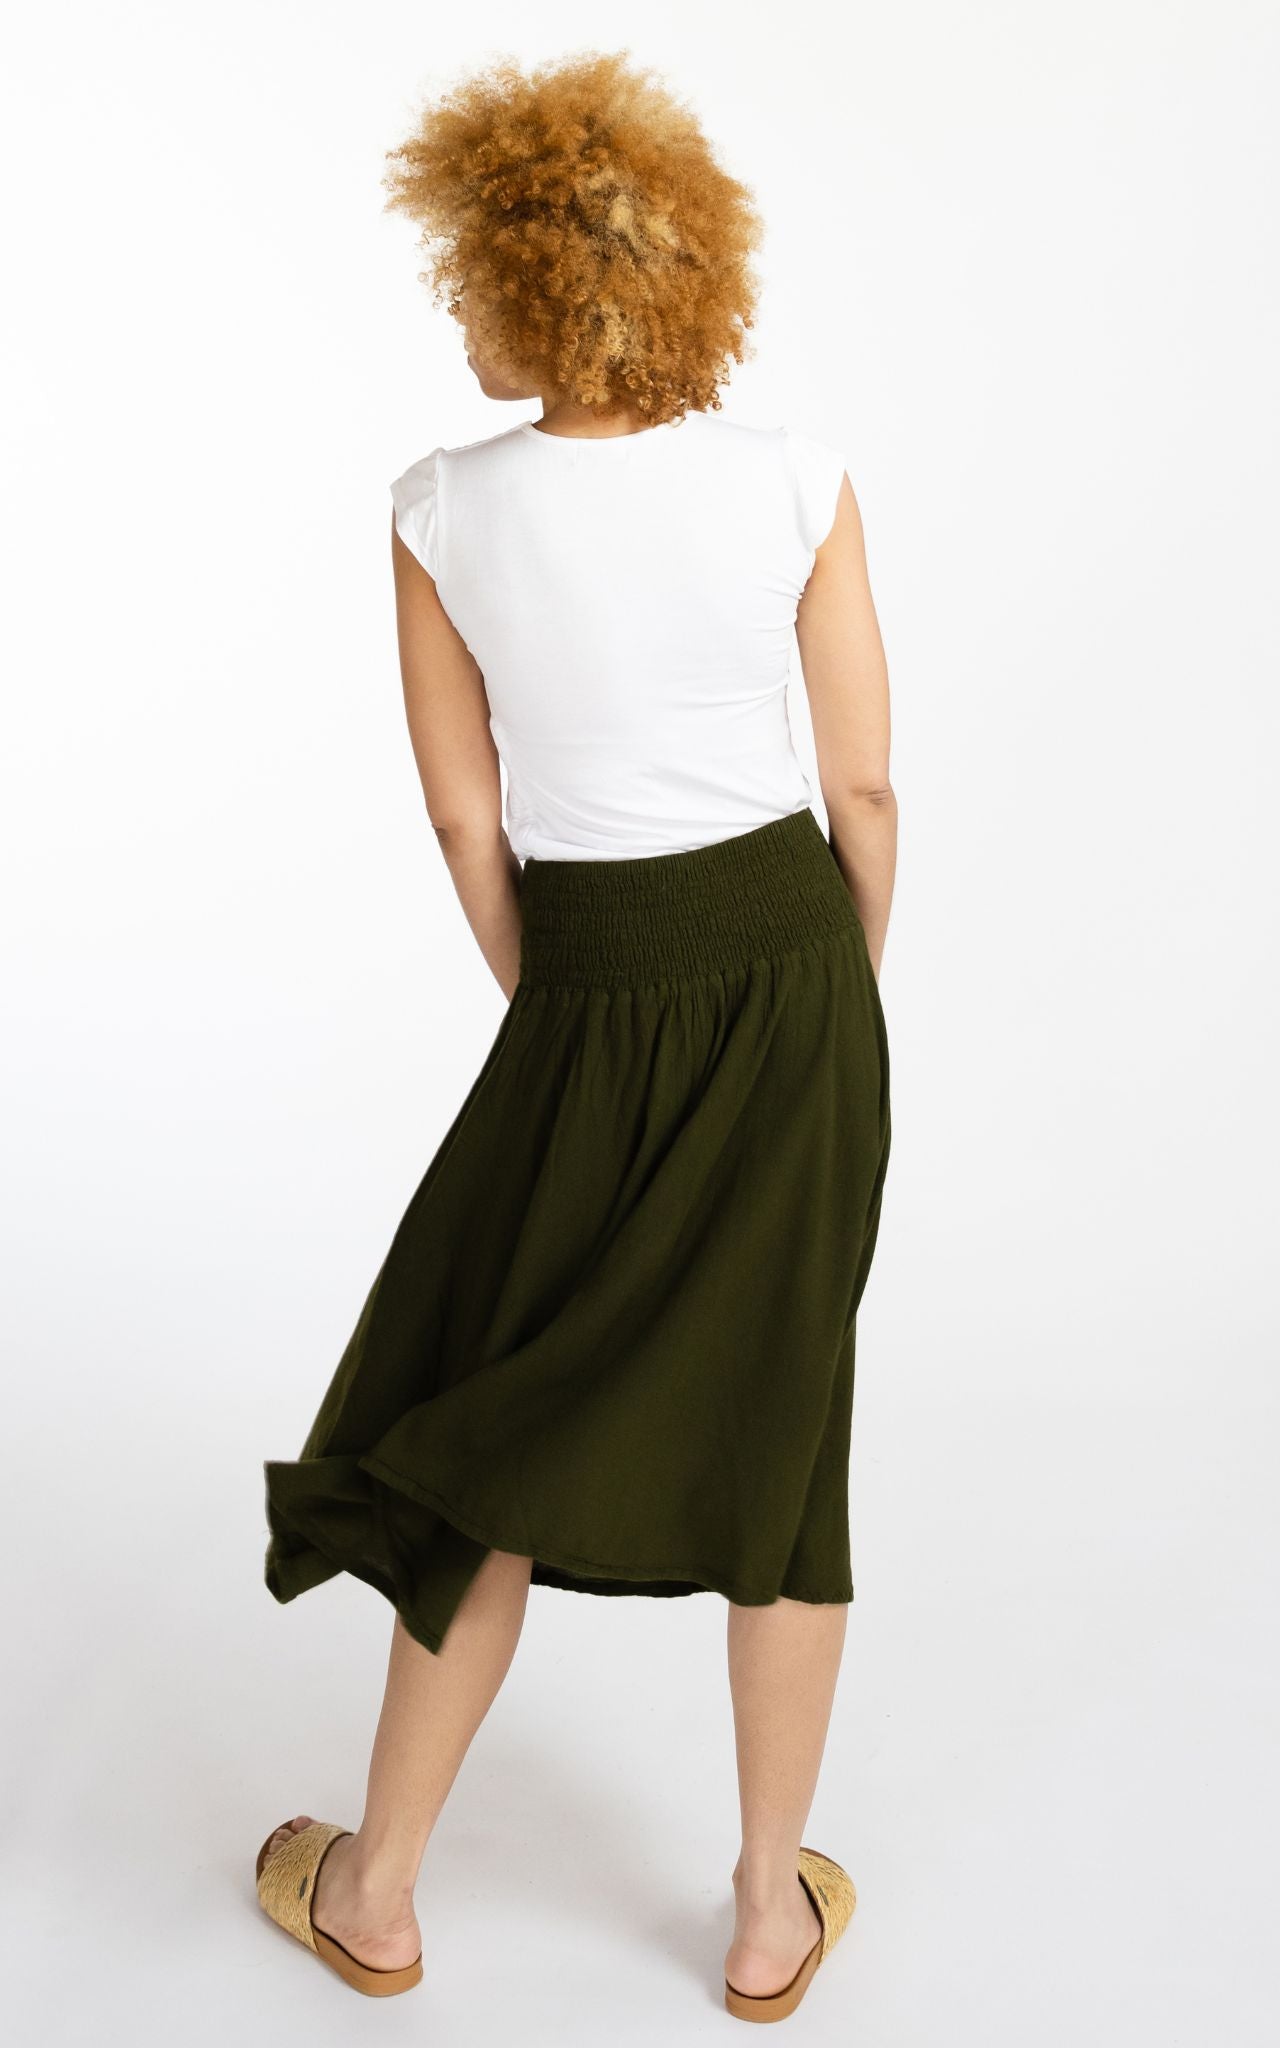 Generously Sized Cotton 'Rosa' Skirt | Ethically made in Nepal – Surya